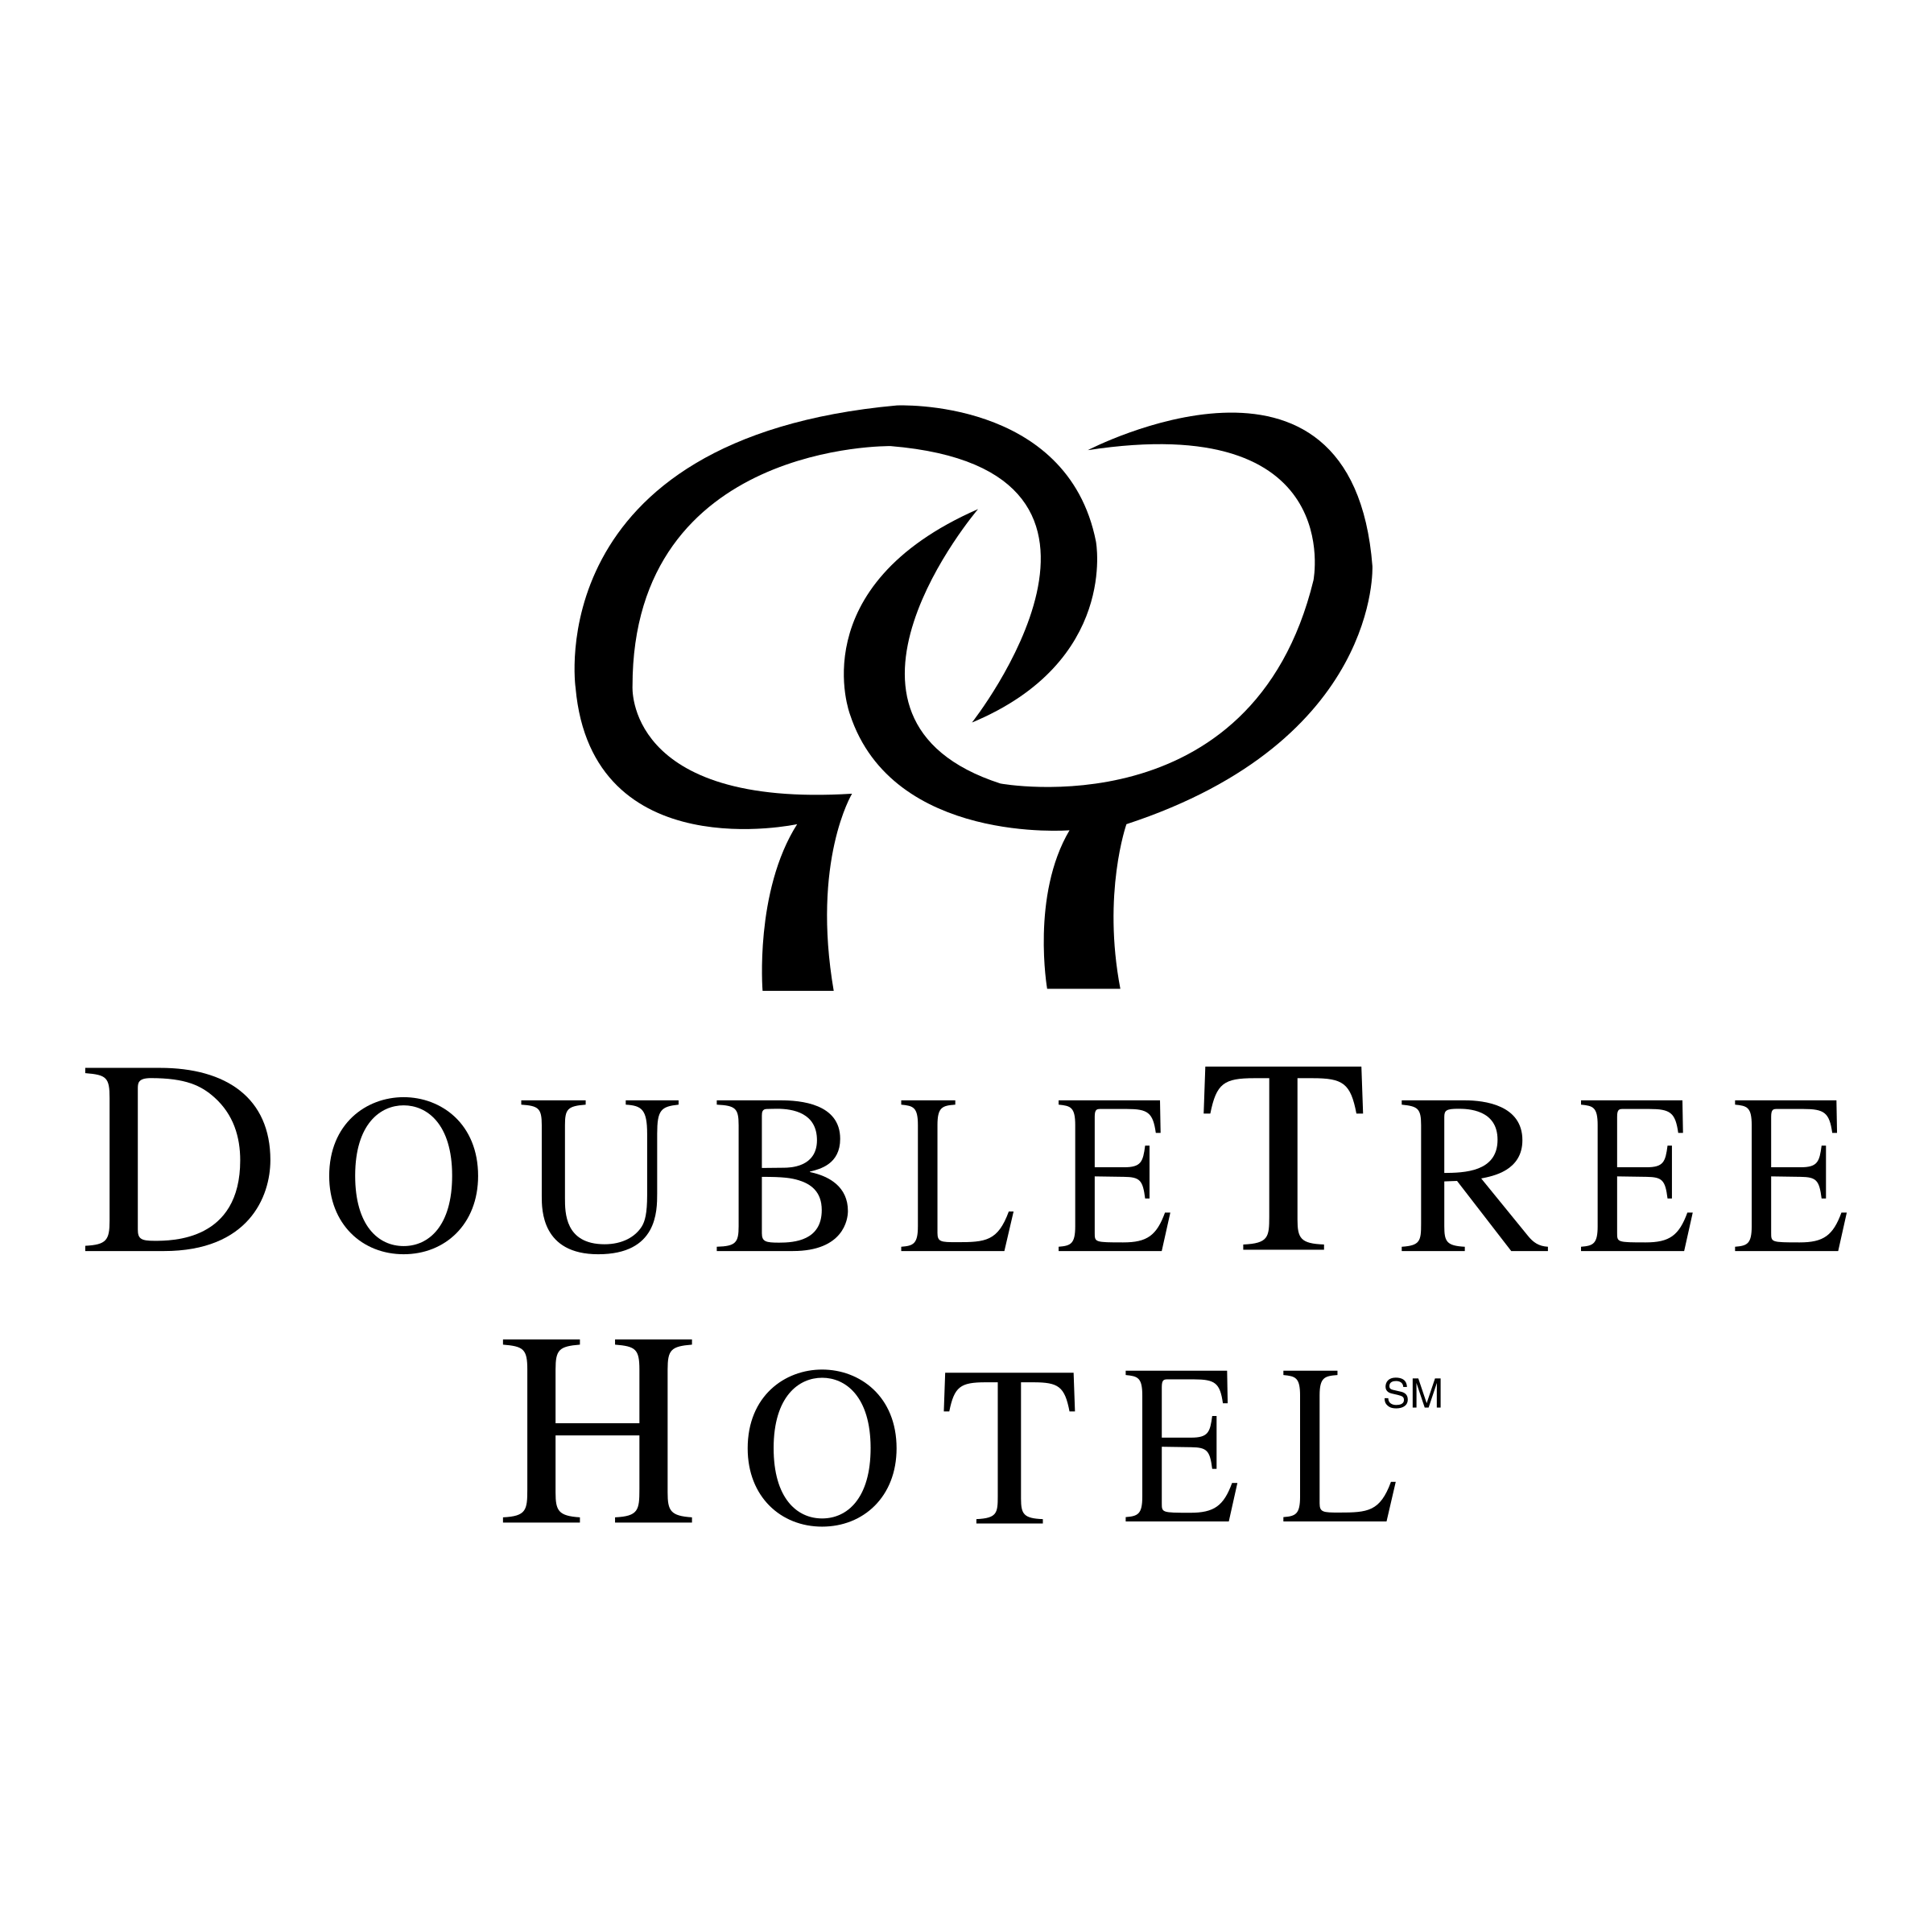 DoubleTree Logo - DoubleTree Hotel Logo PNG Transparent & SVG Vector